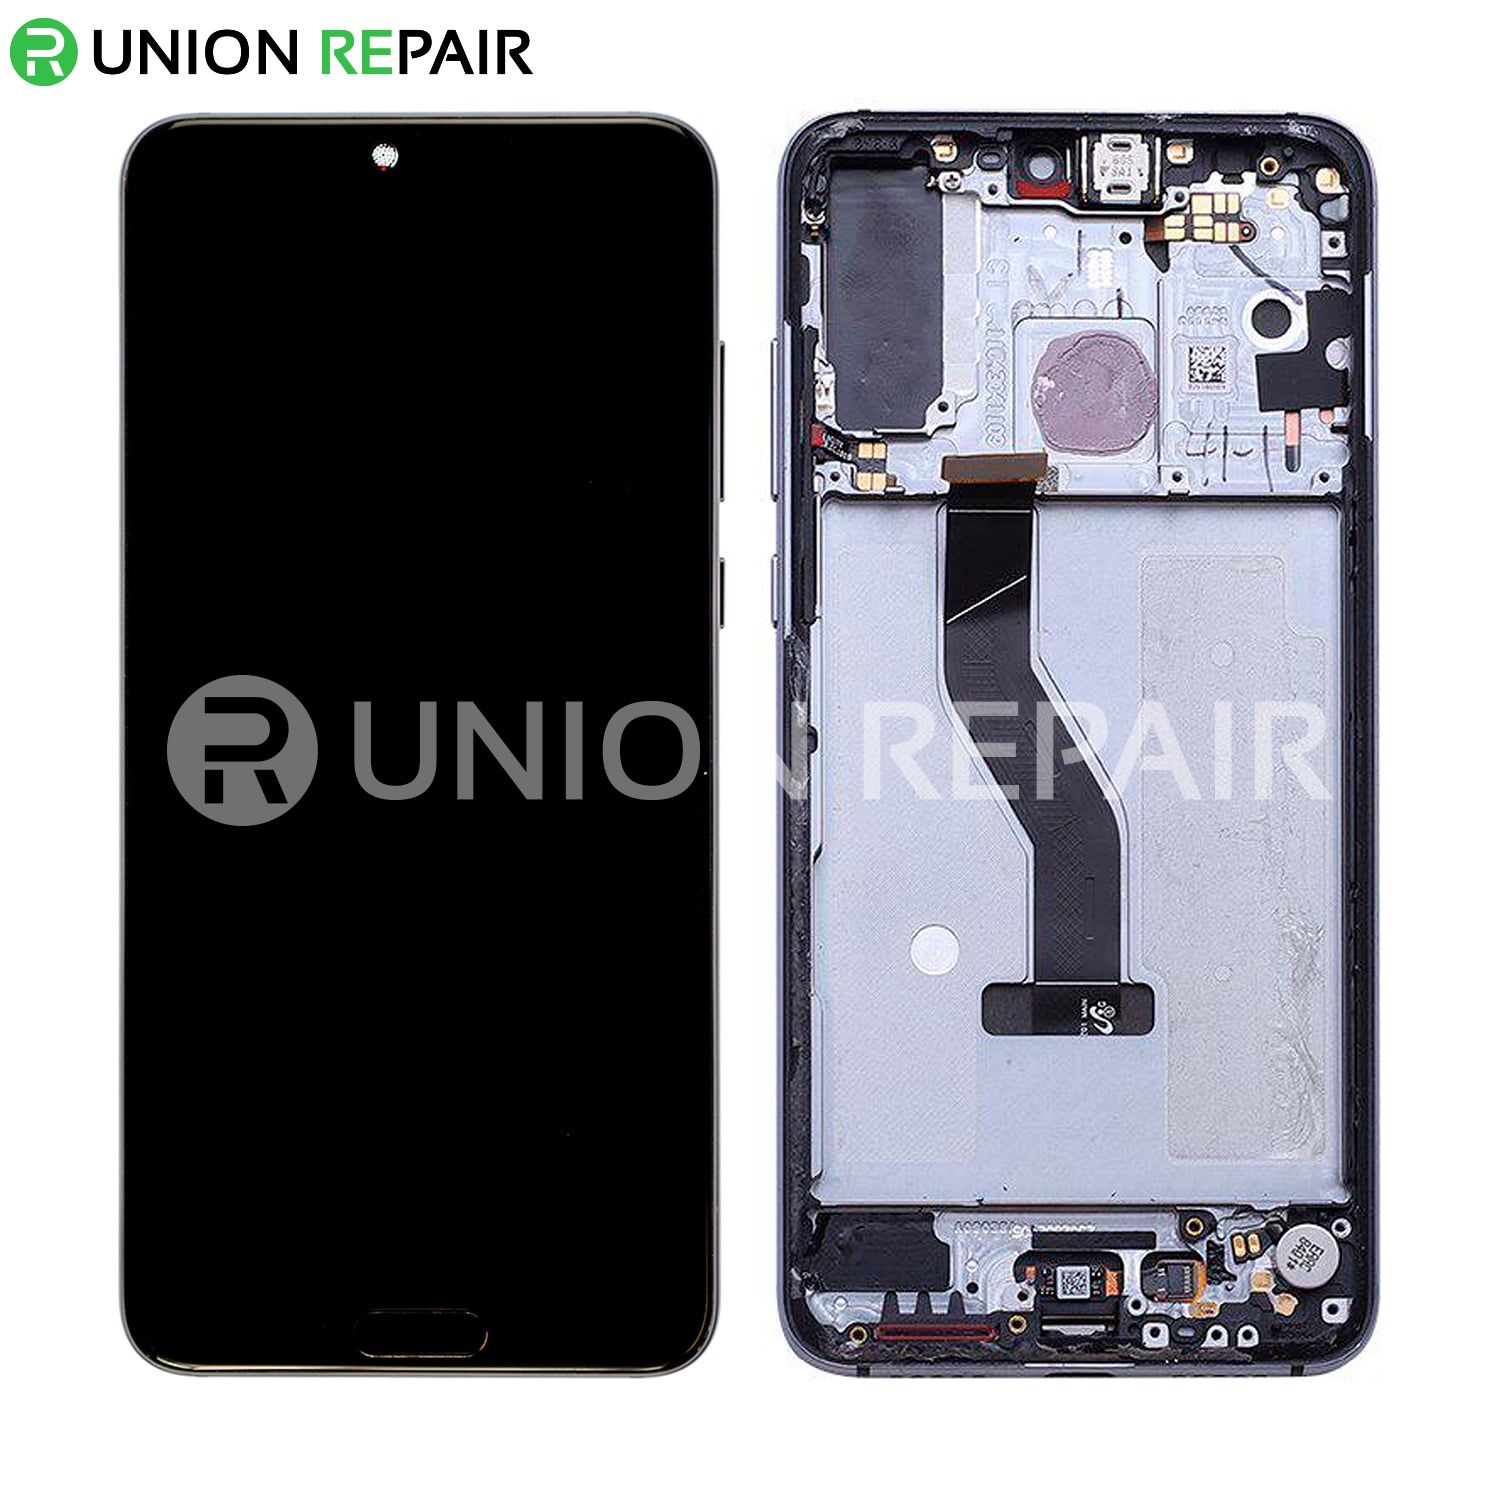 Replacement for Huawei P20 Pro LCD Screen Digitizer Assembly with Frame - Twilight